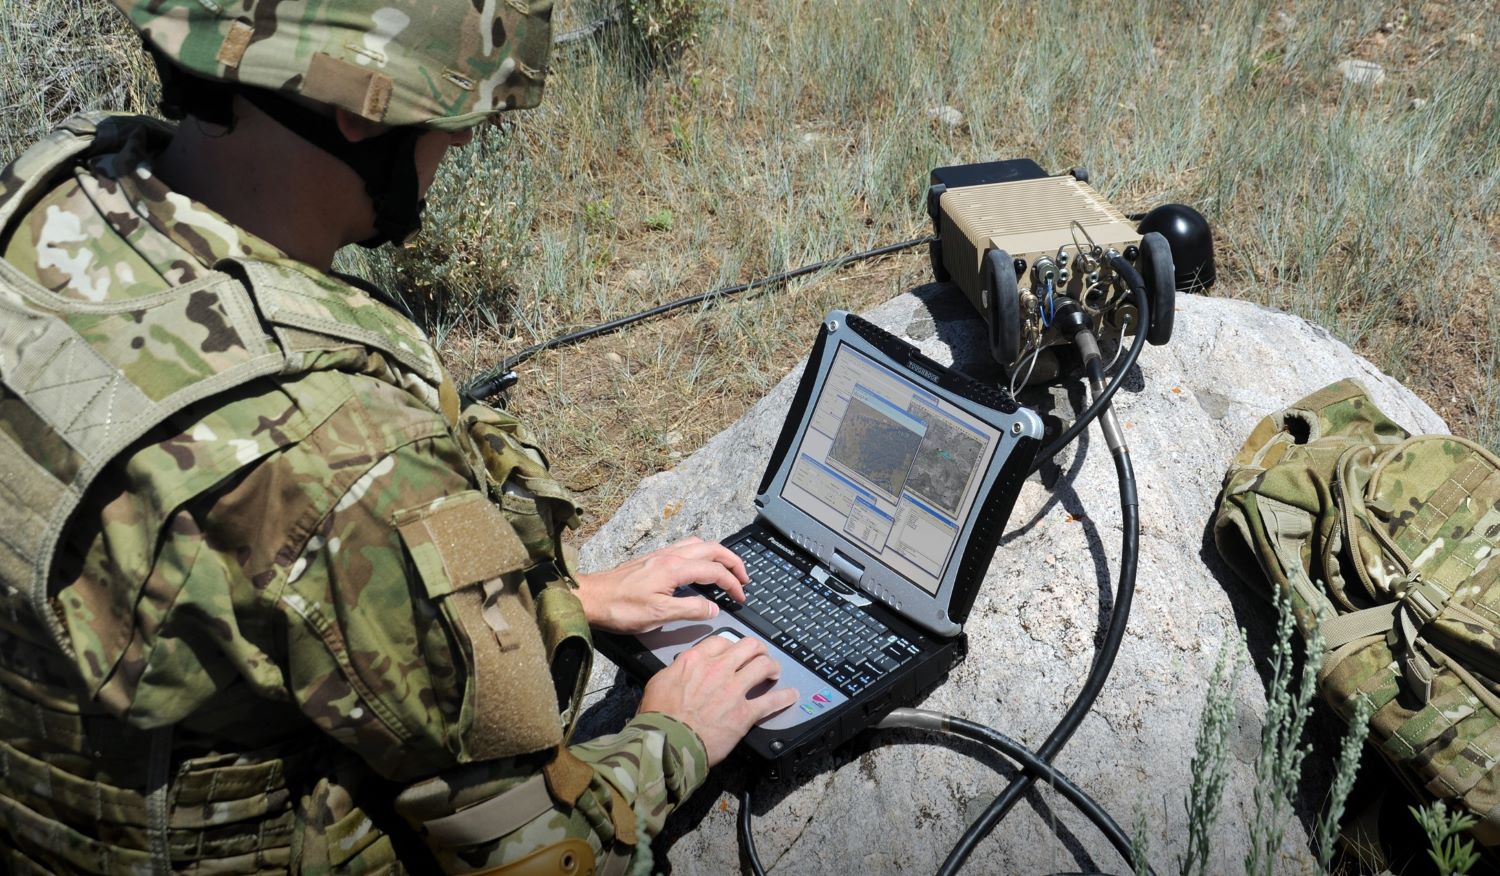 Soldiers are using L3Harris software